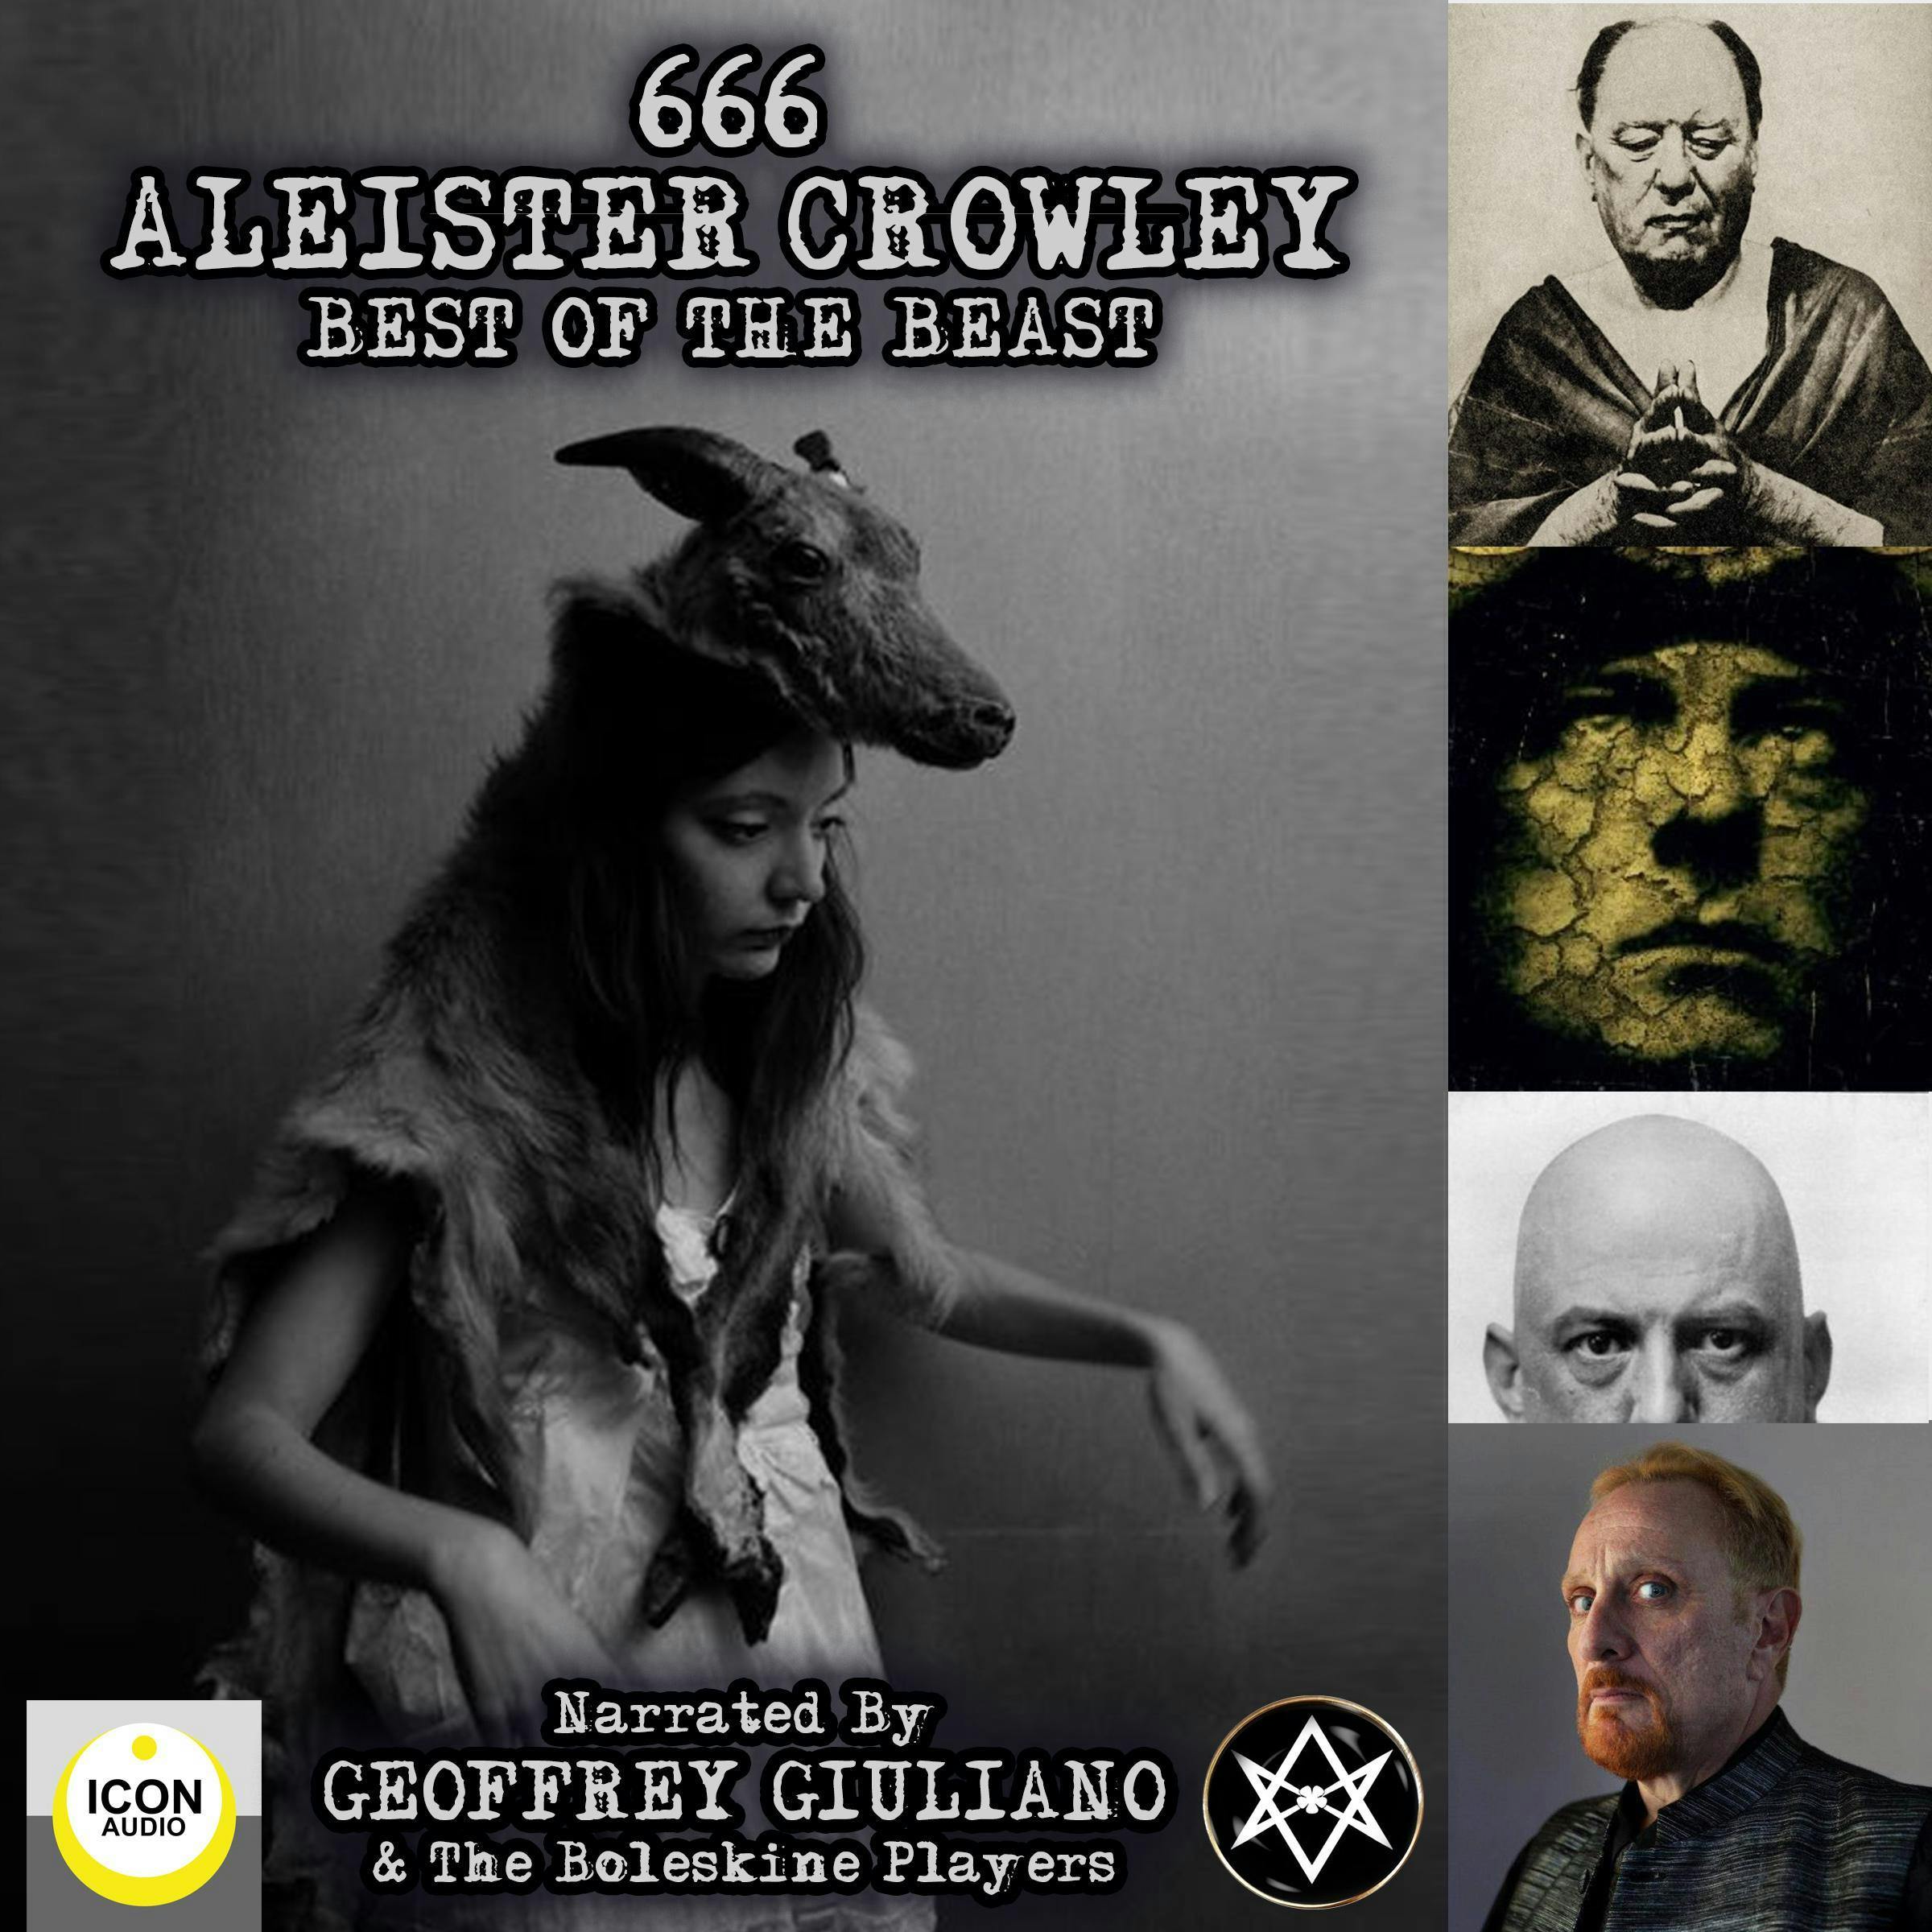 666 Aleister Crowley Best Of The Beast - Aleister Crowley